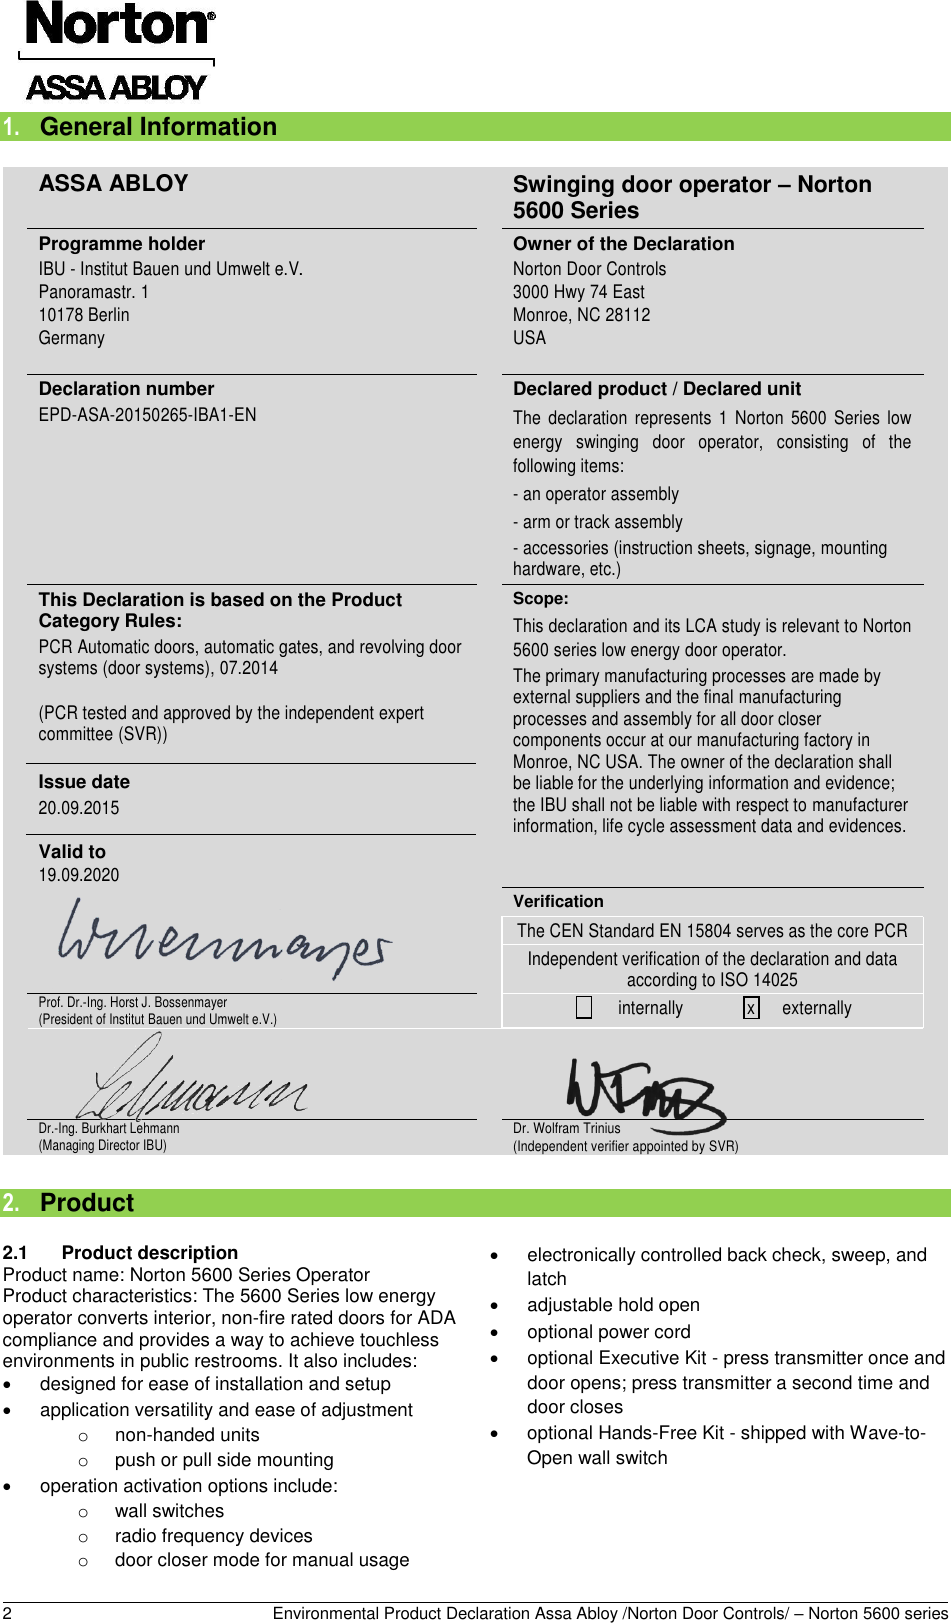 Page 3 of 12 - Norton  5600 Series Swinging Door Operator - Environmental Product Declaration (EPD) 155.1 ASSA ABLOY Mr EPD